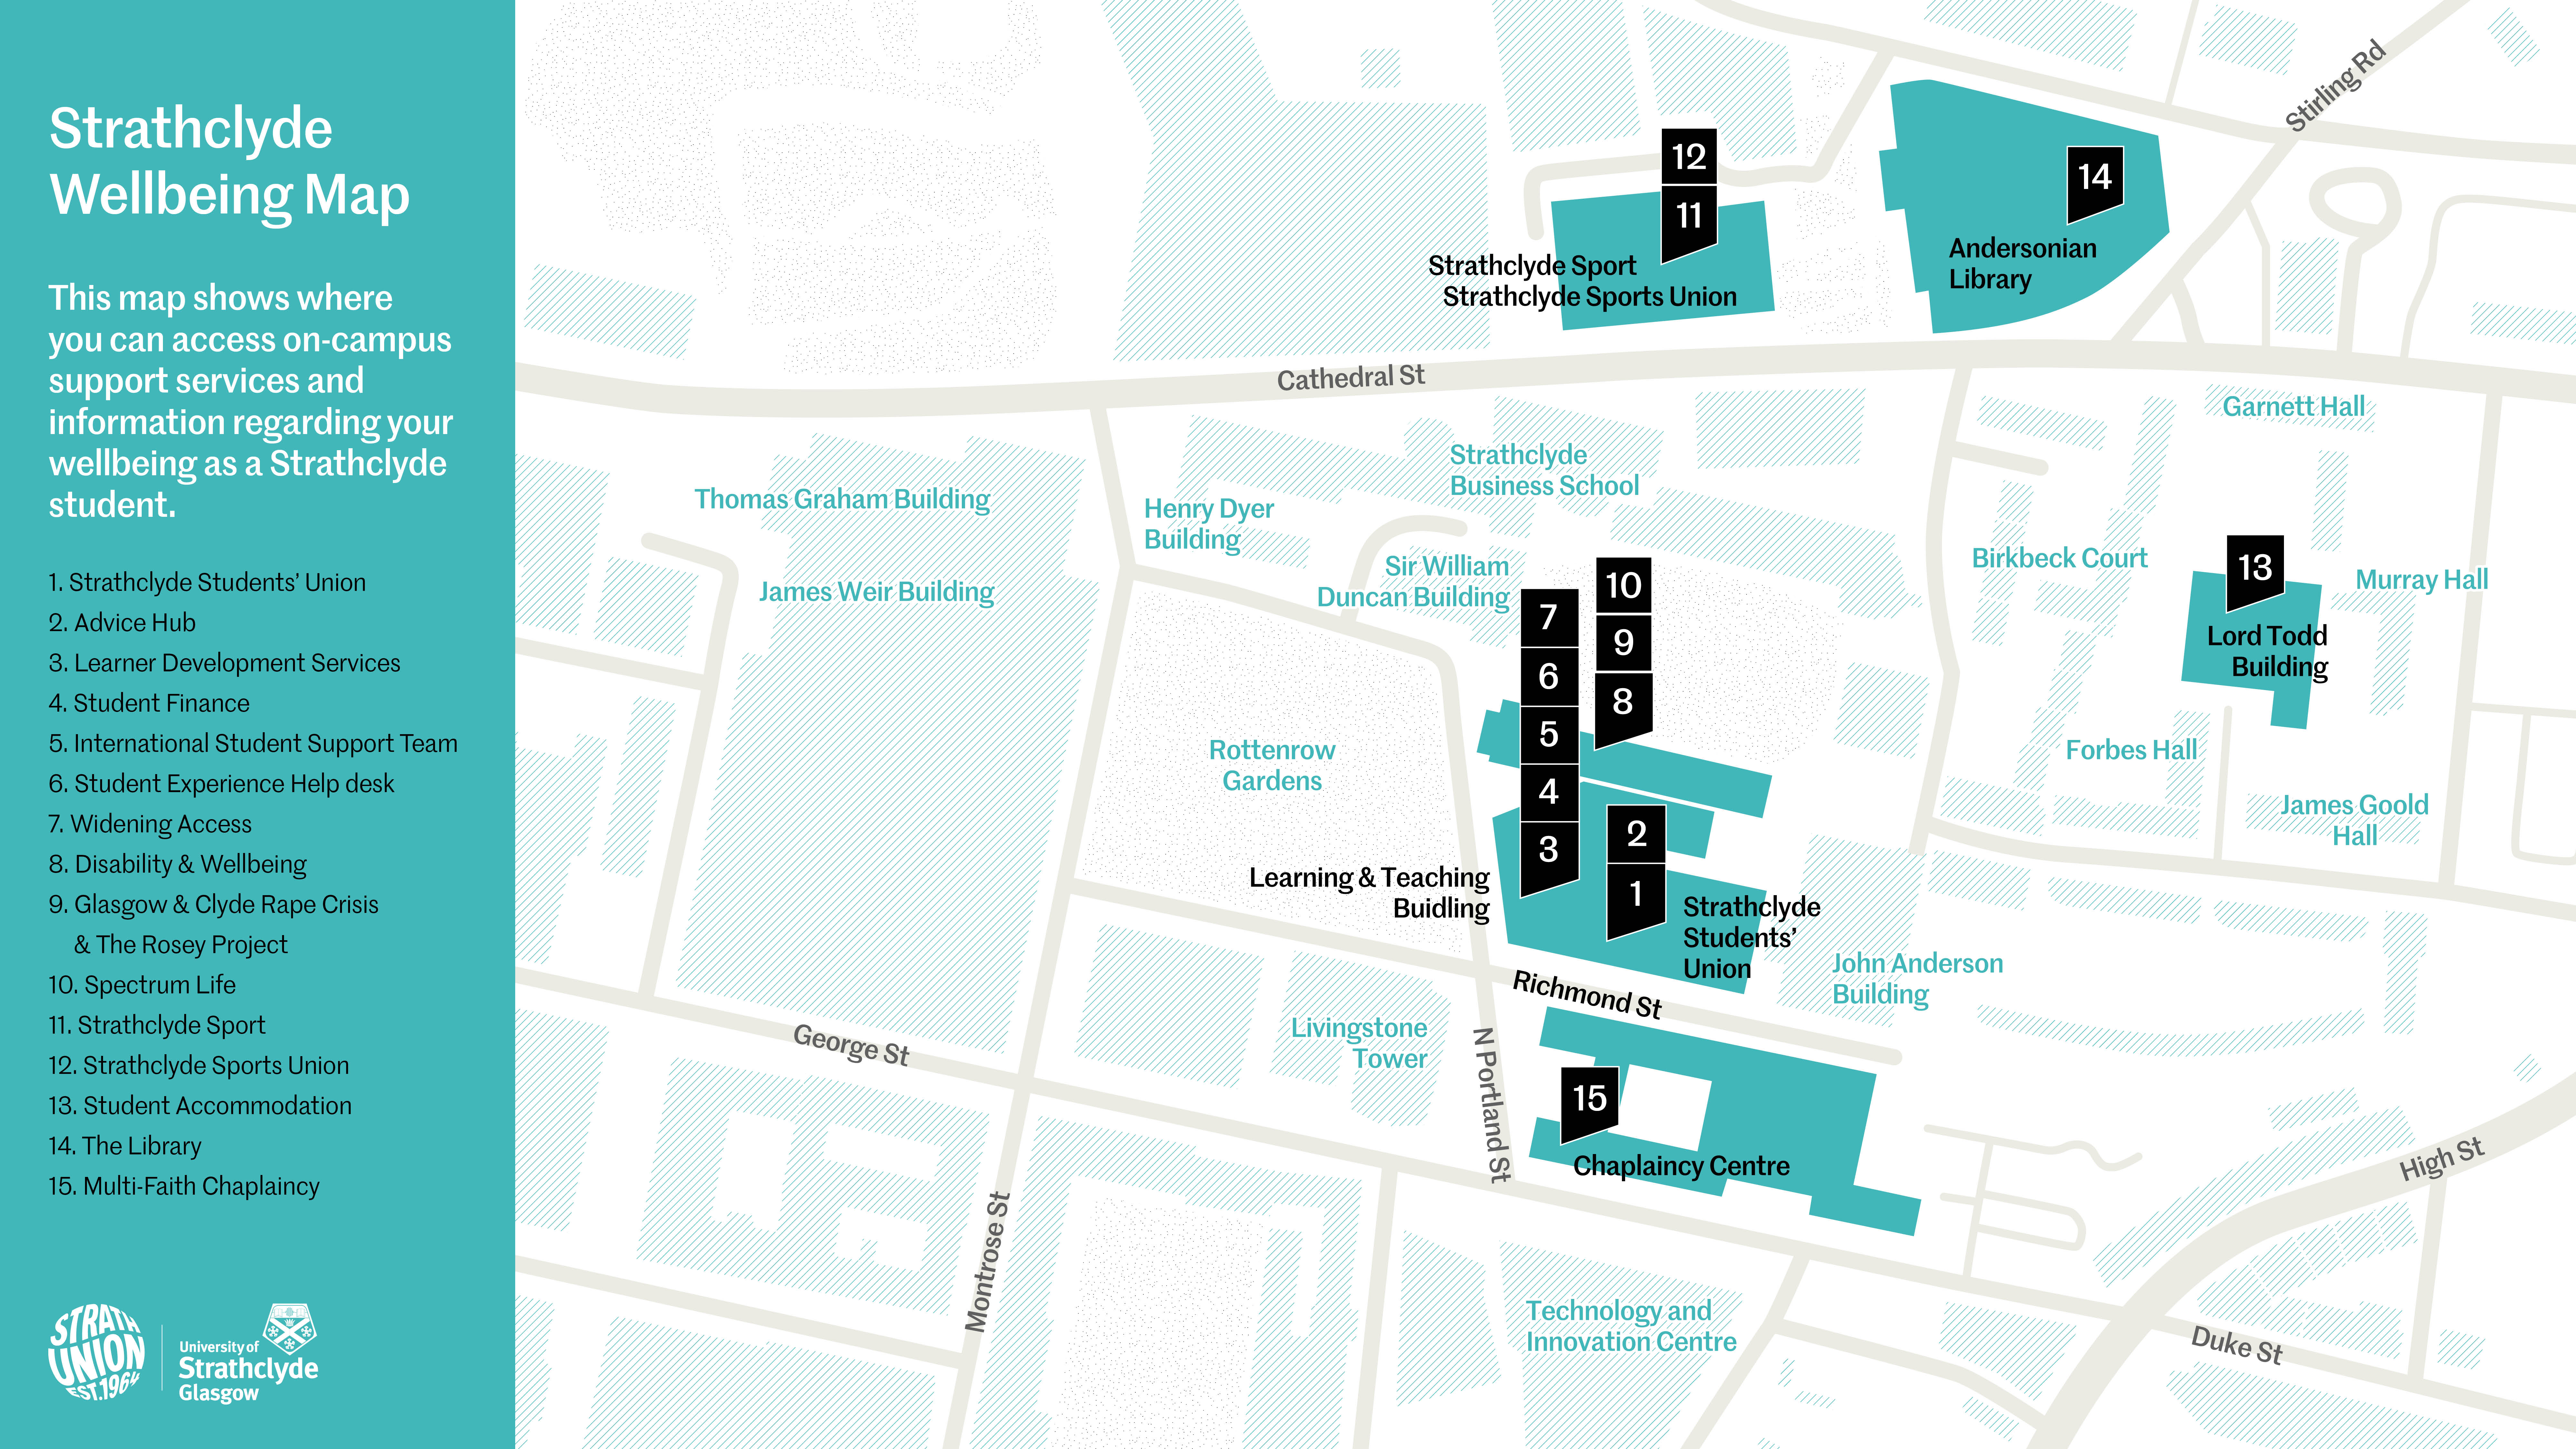 Strathclyde wellbeing services shown on illustrated map.